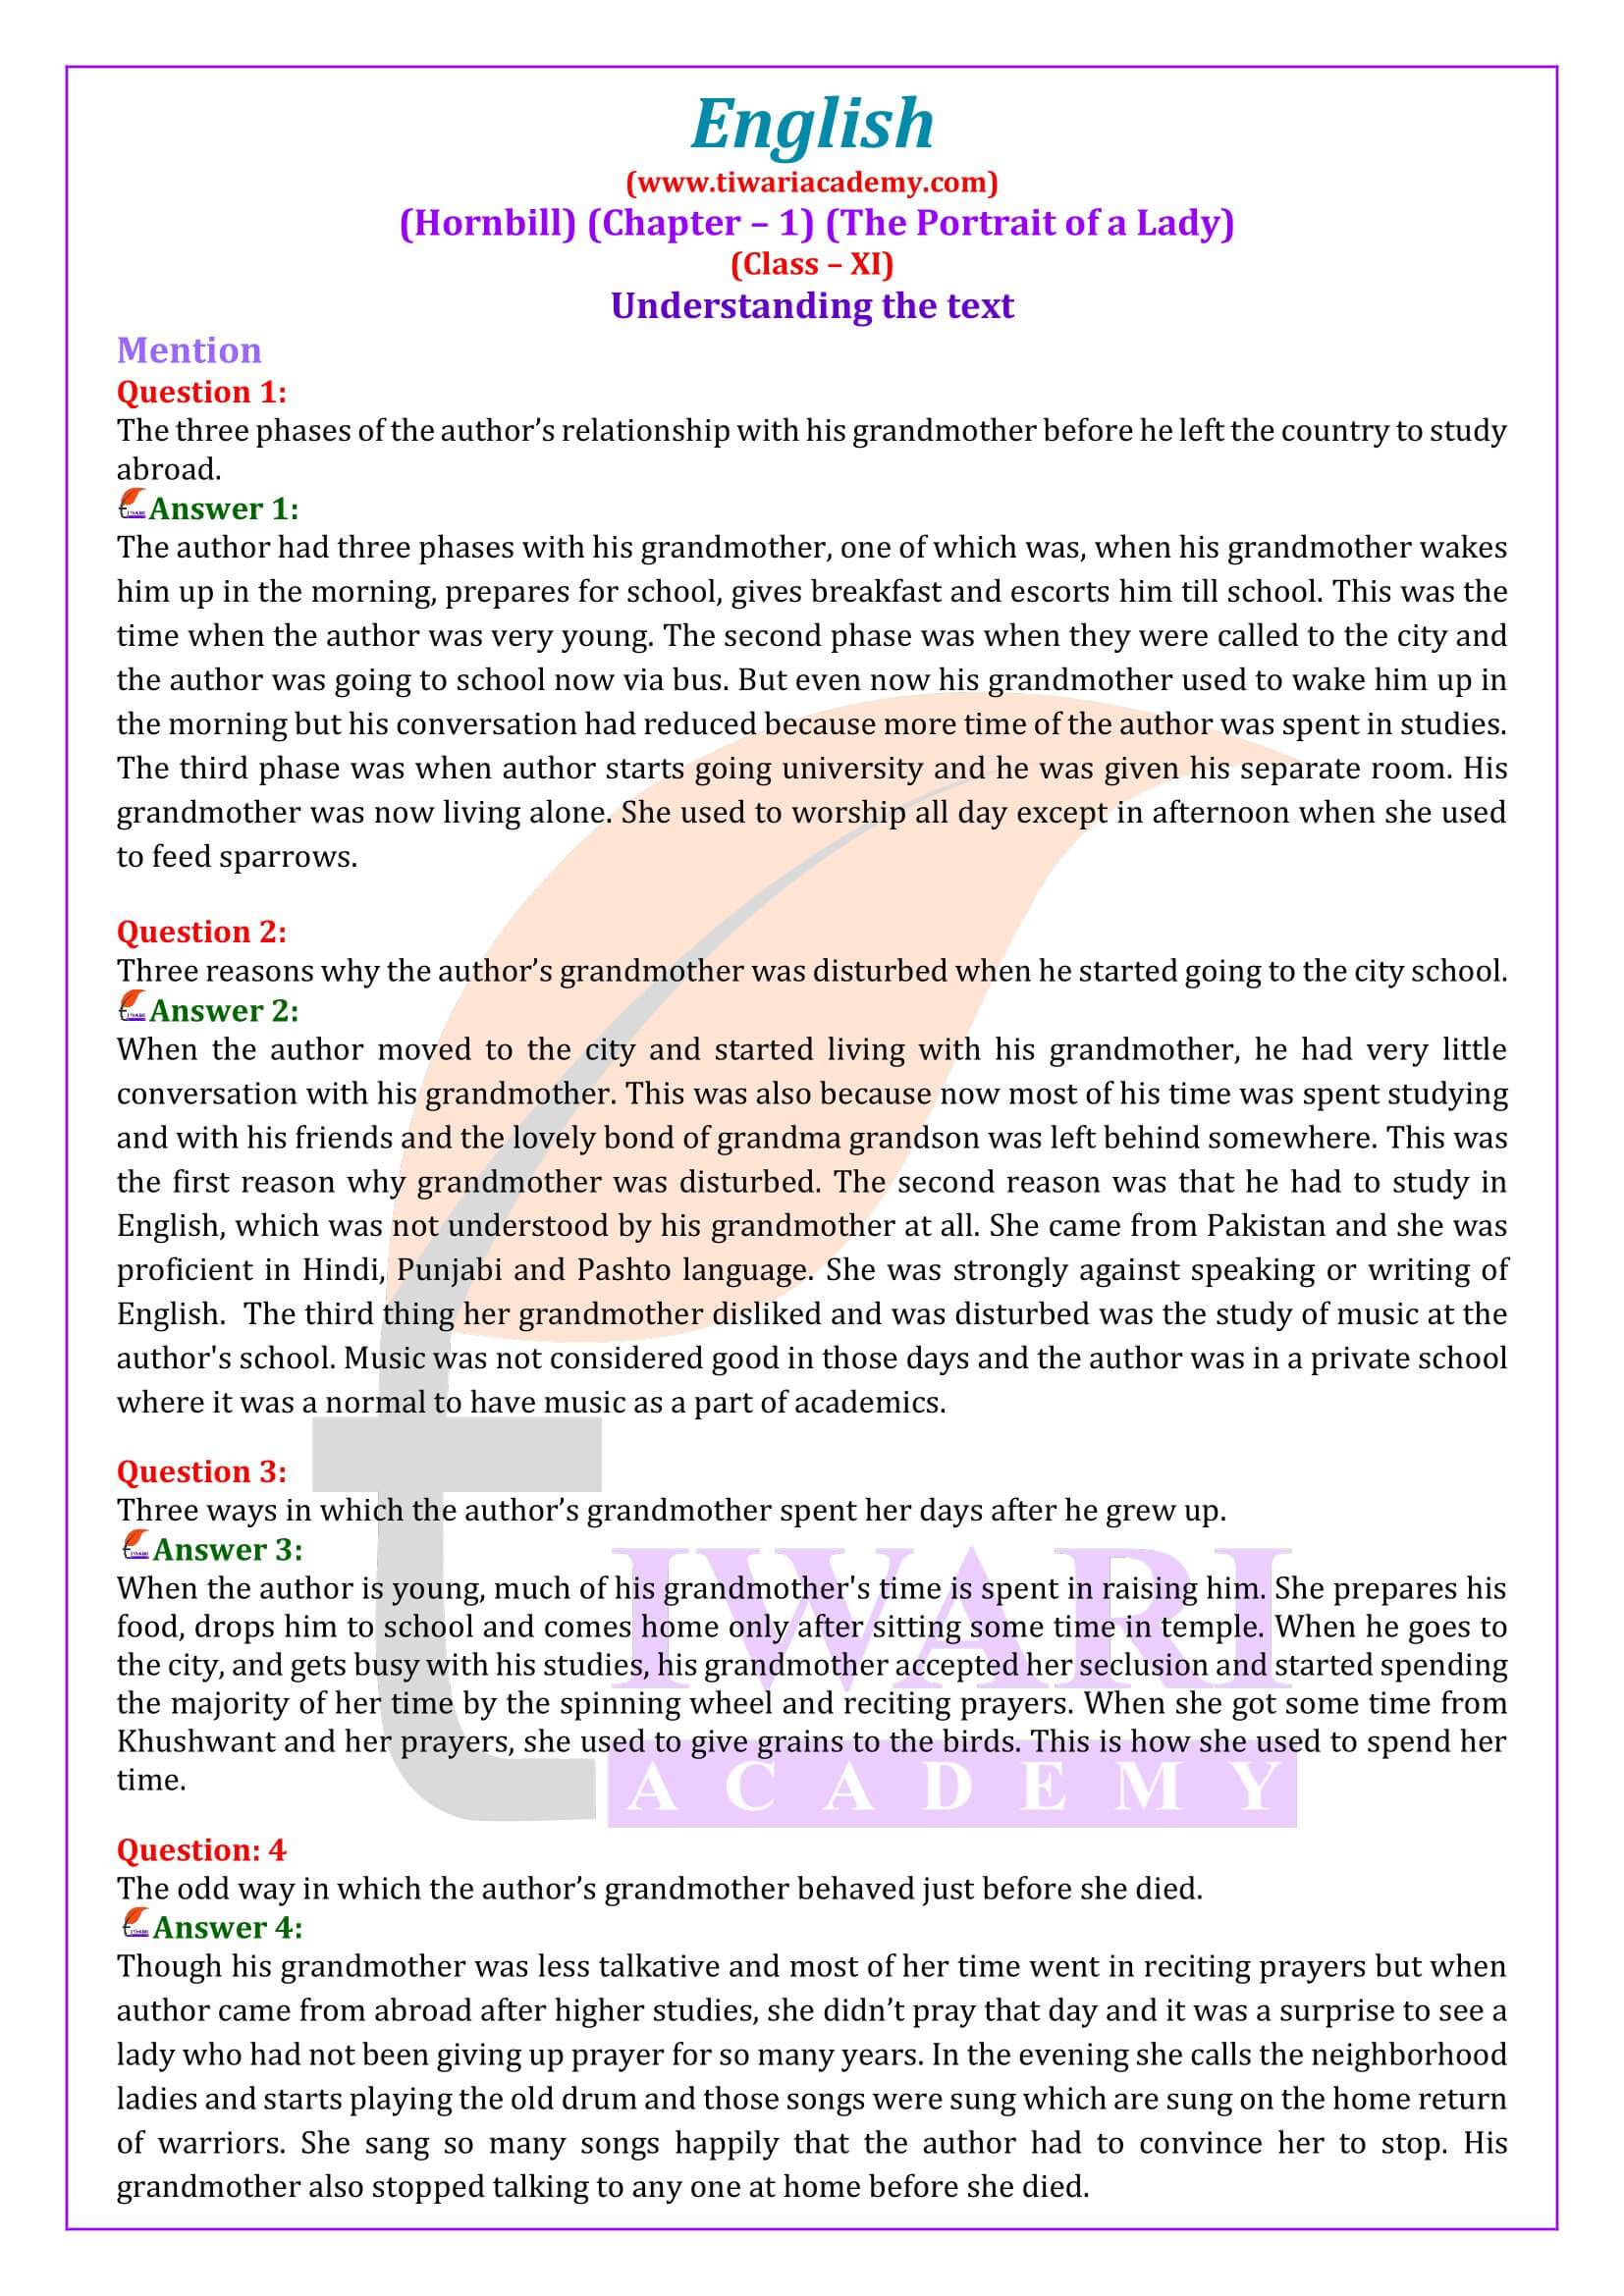 Class 11 English Hornbill Chapter 1 The Portrait of a Lady